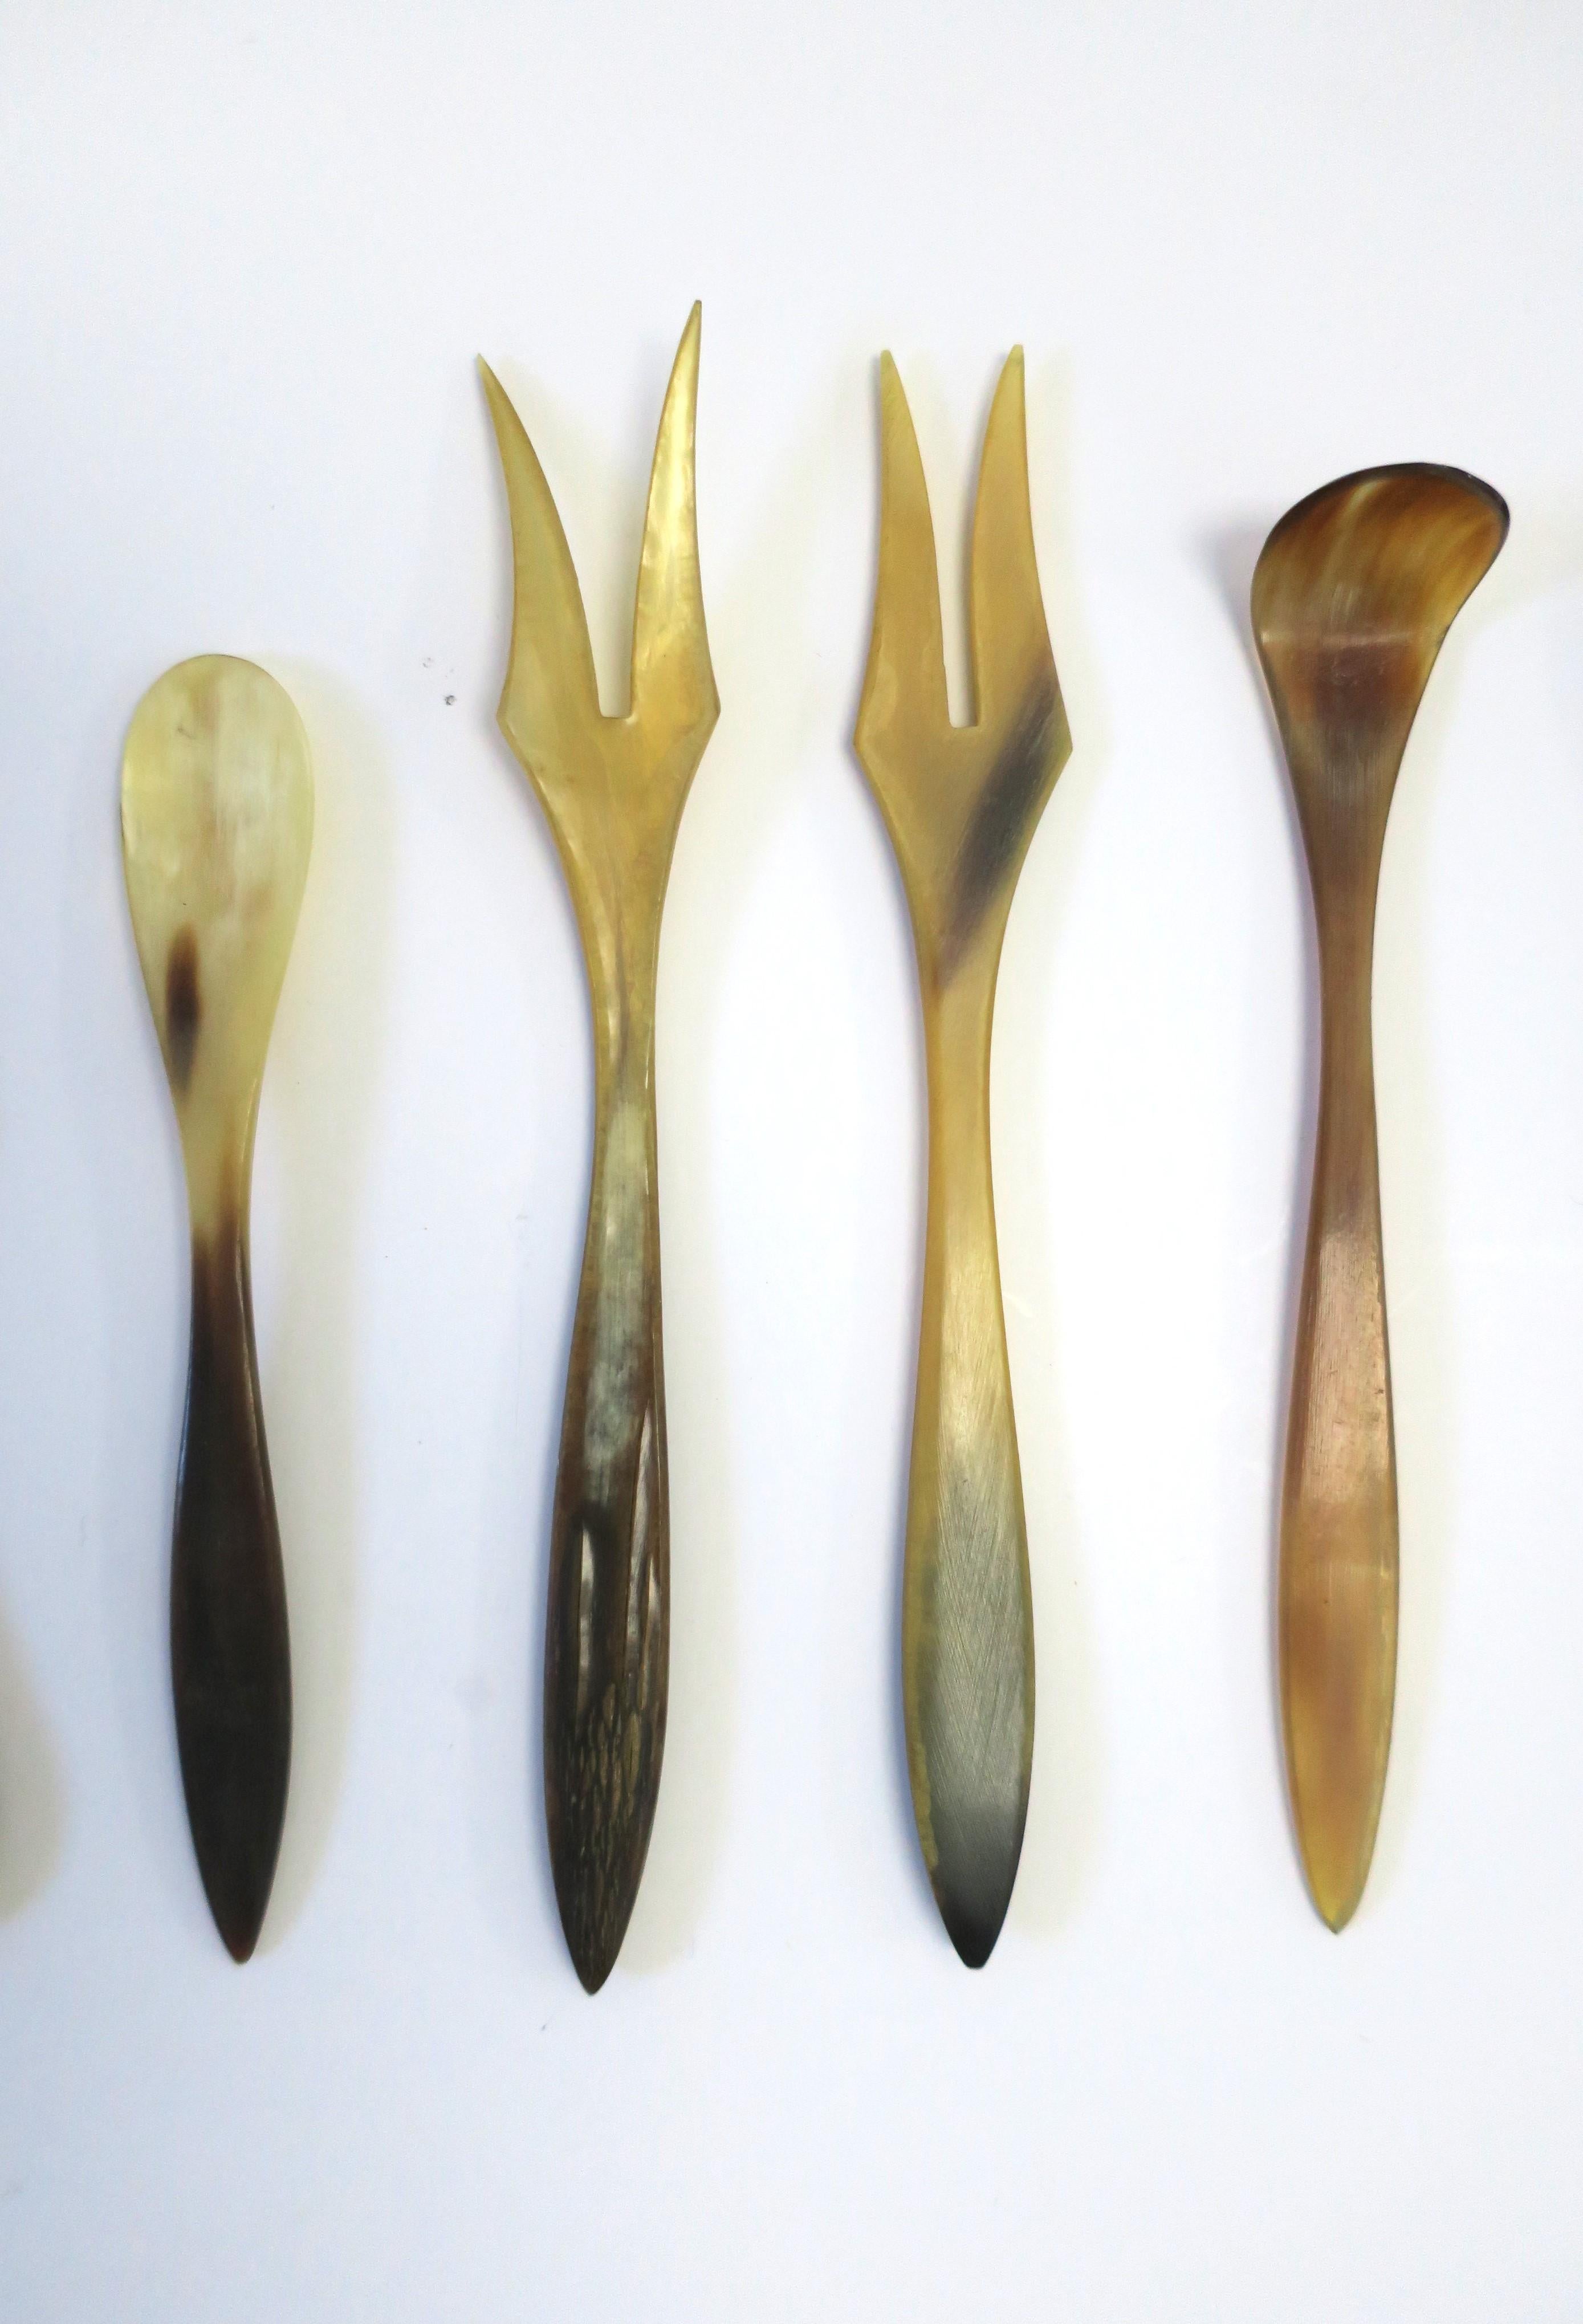 Scandinavian Modern Minimalist Horn Appetizer Utensils, Set of 6 In Good Condition For Sale In New York, NY